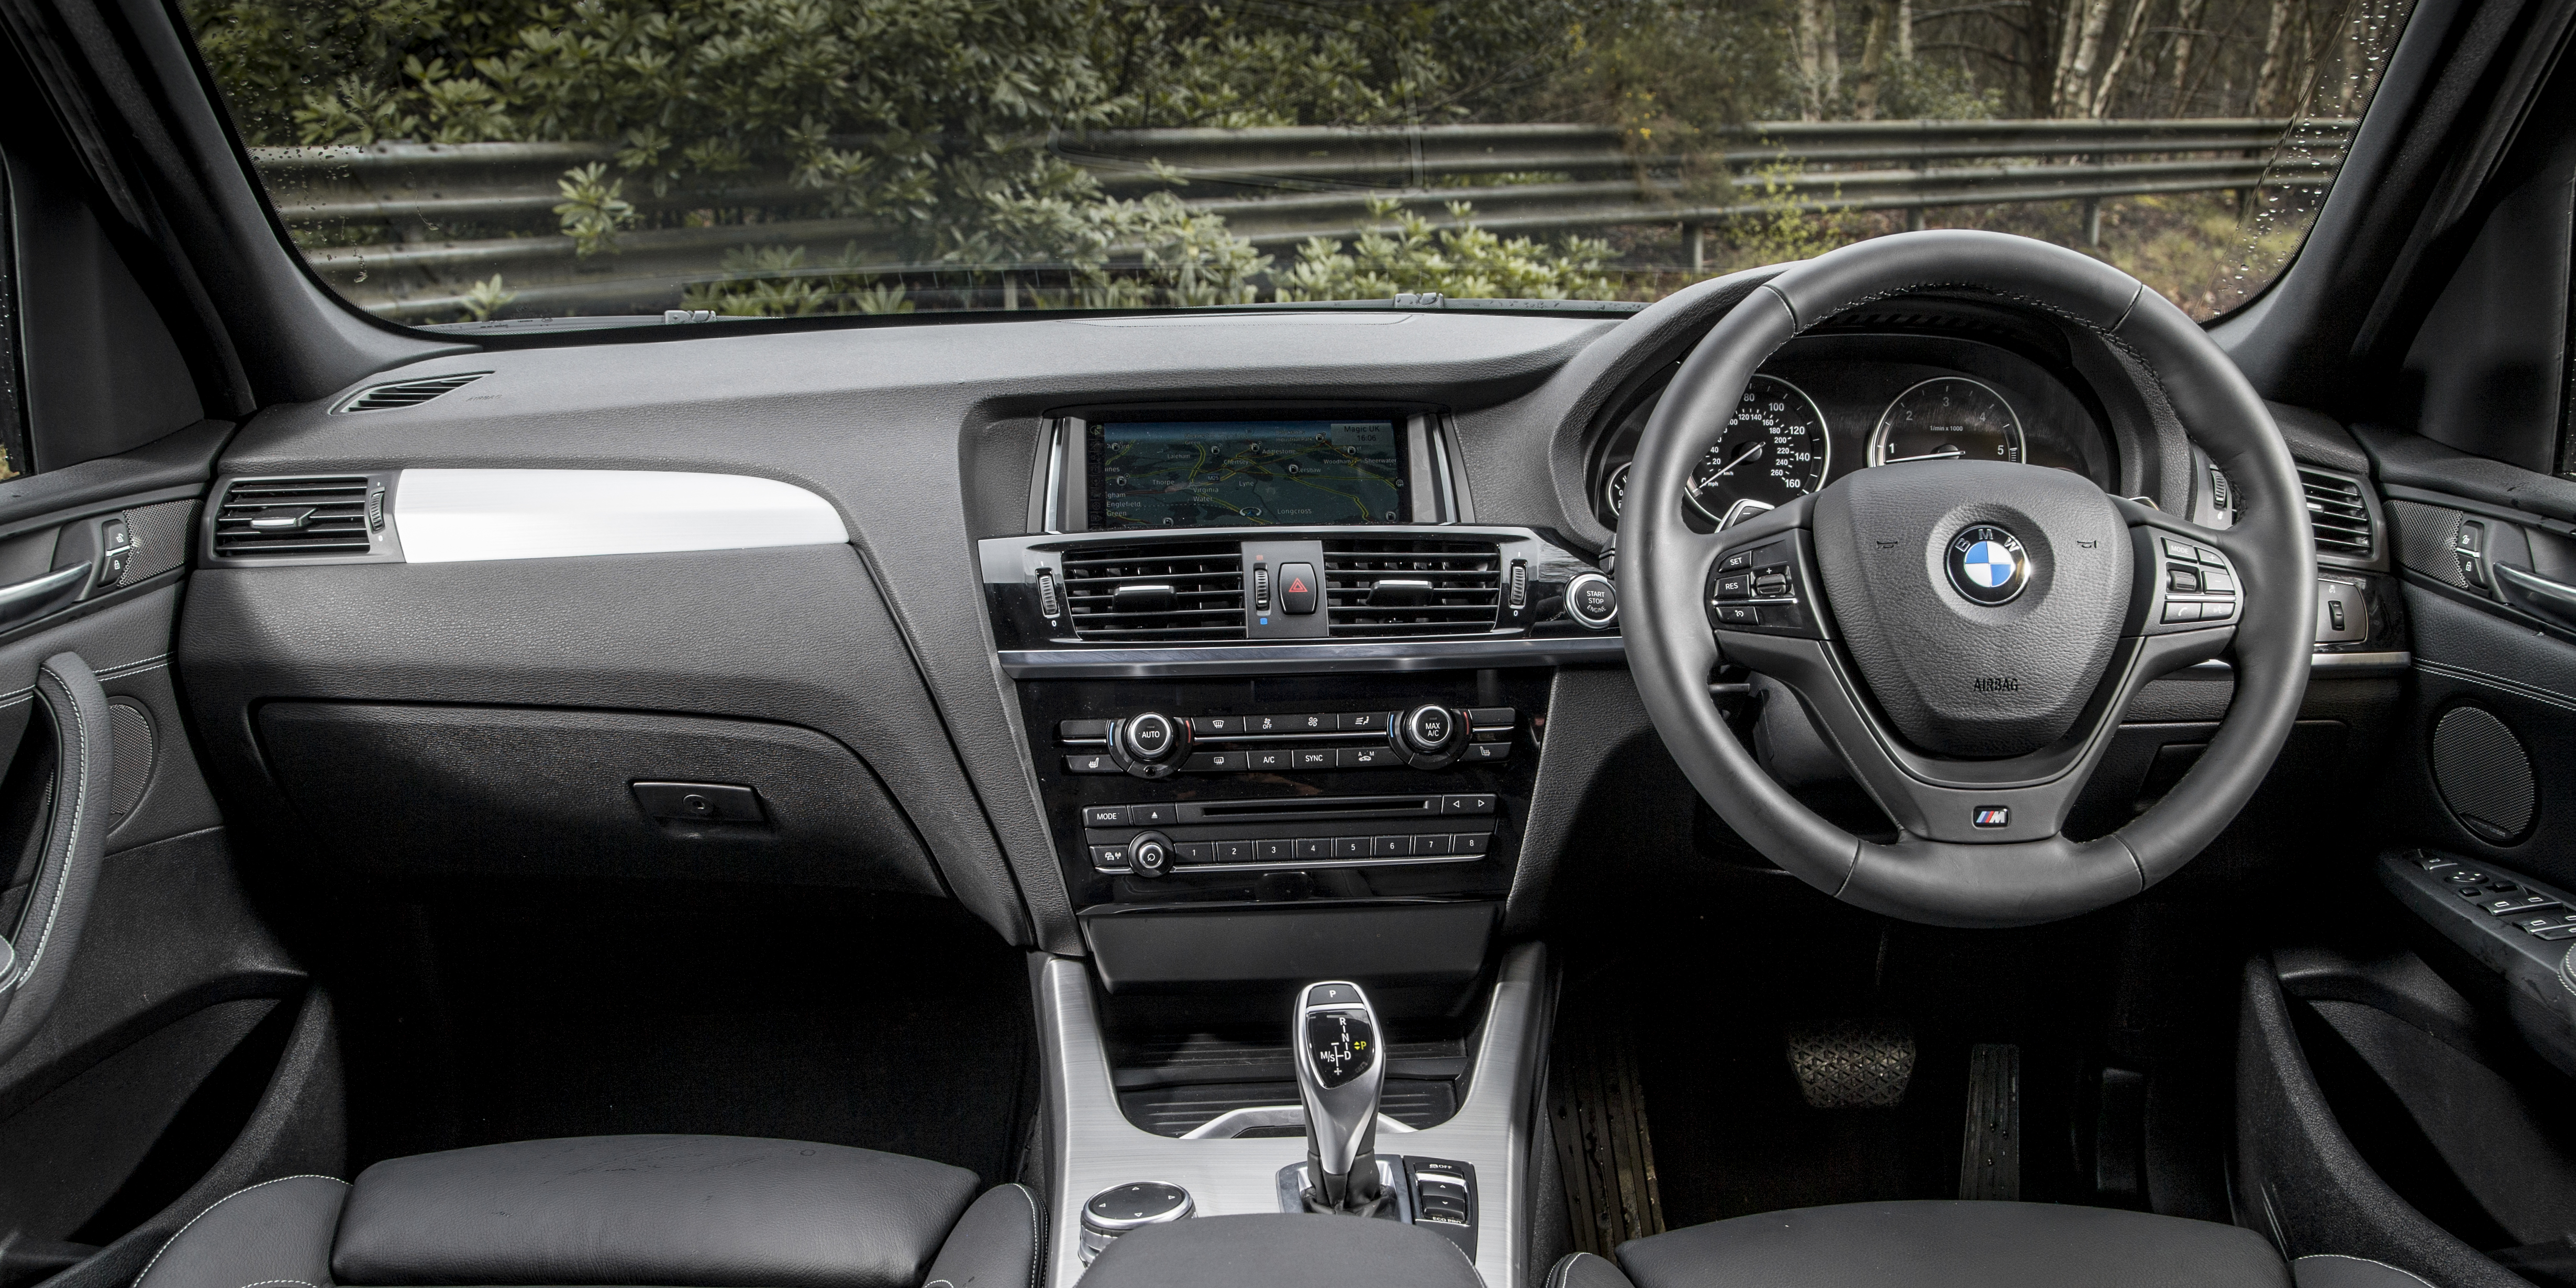 The interior looks sporty, but isn't as luxurious as that in a Mercedes GLC